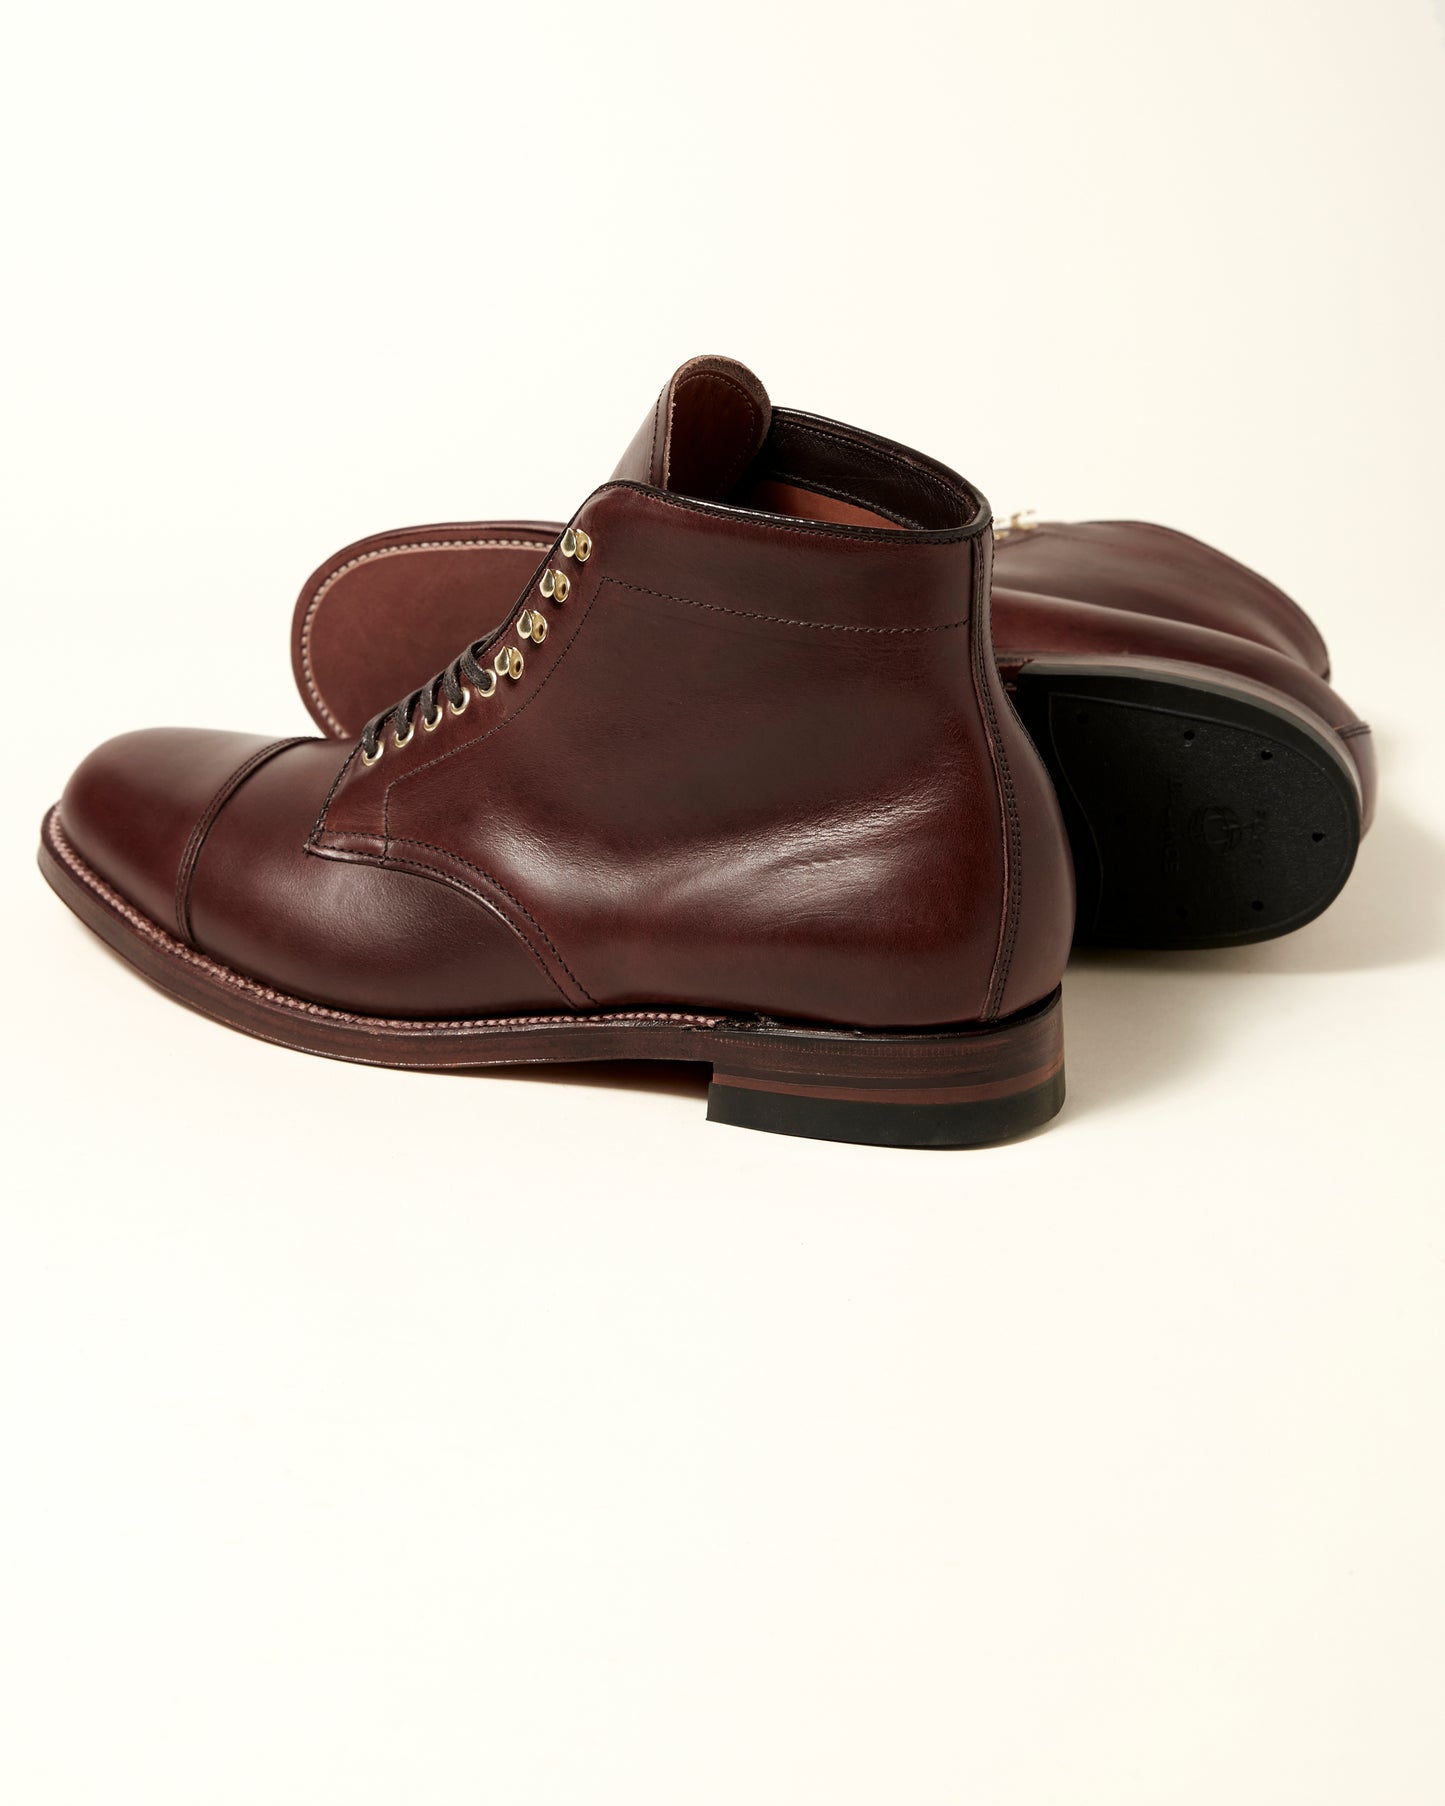 "Scout" Straight Tip Boot in Brown Chromexcel, Barrie Last